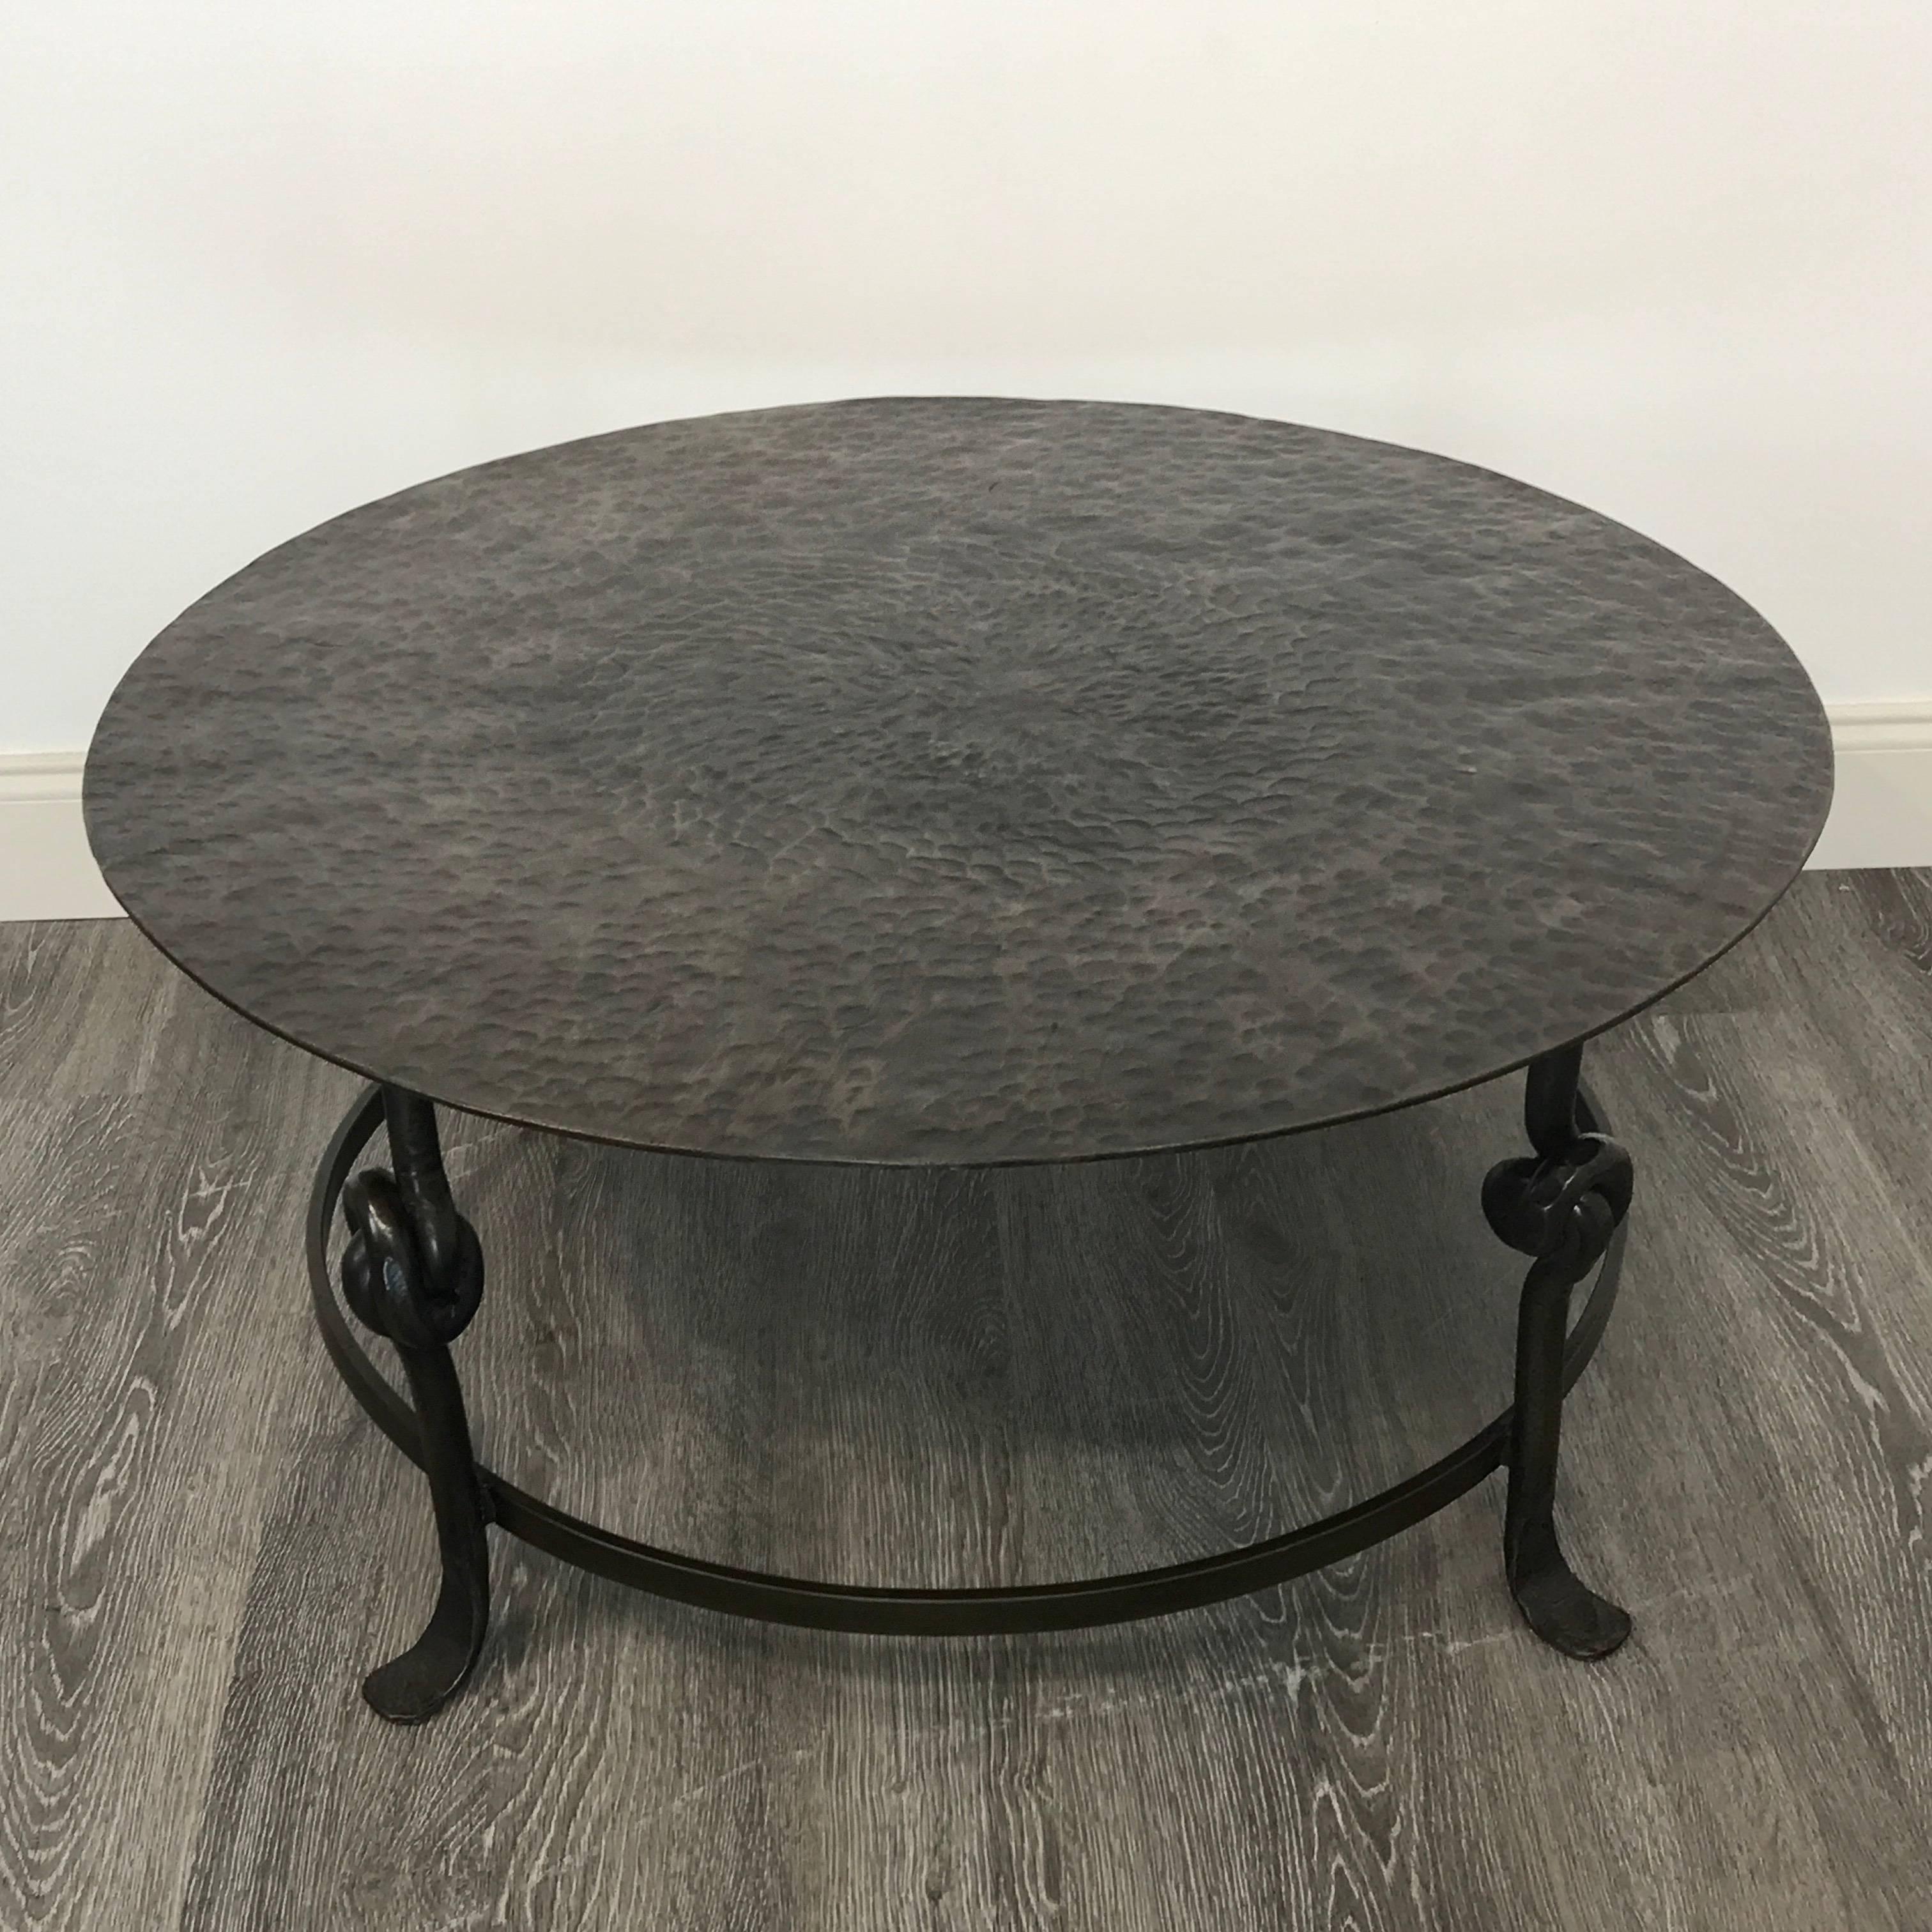 Solid bronze sculptural round coffee table, raised on three knotted legs.